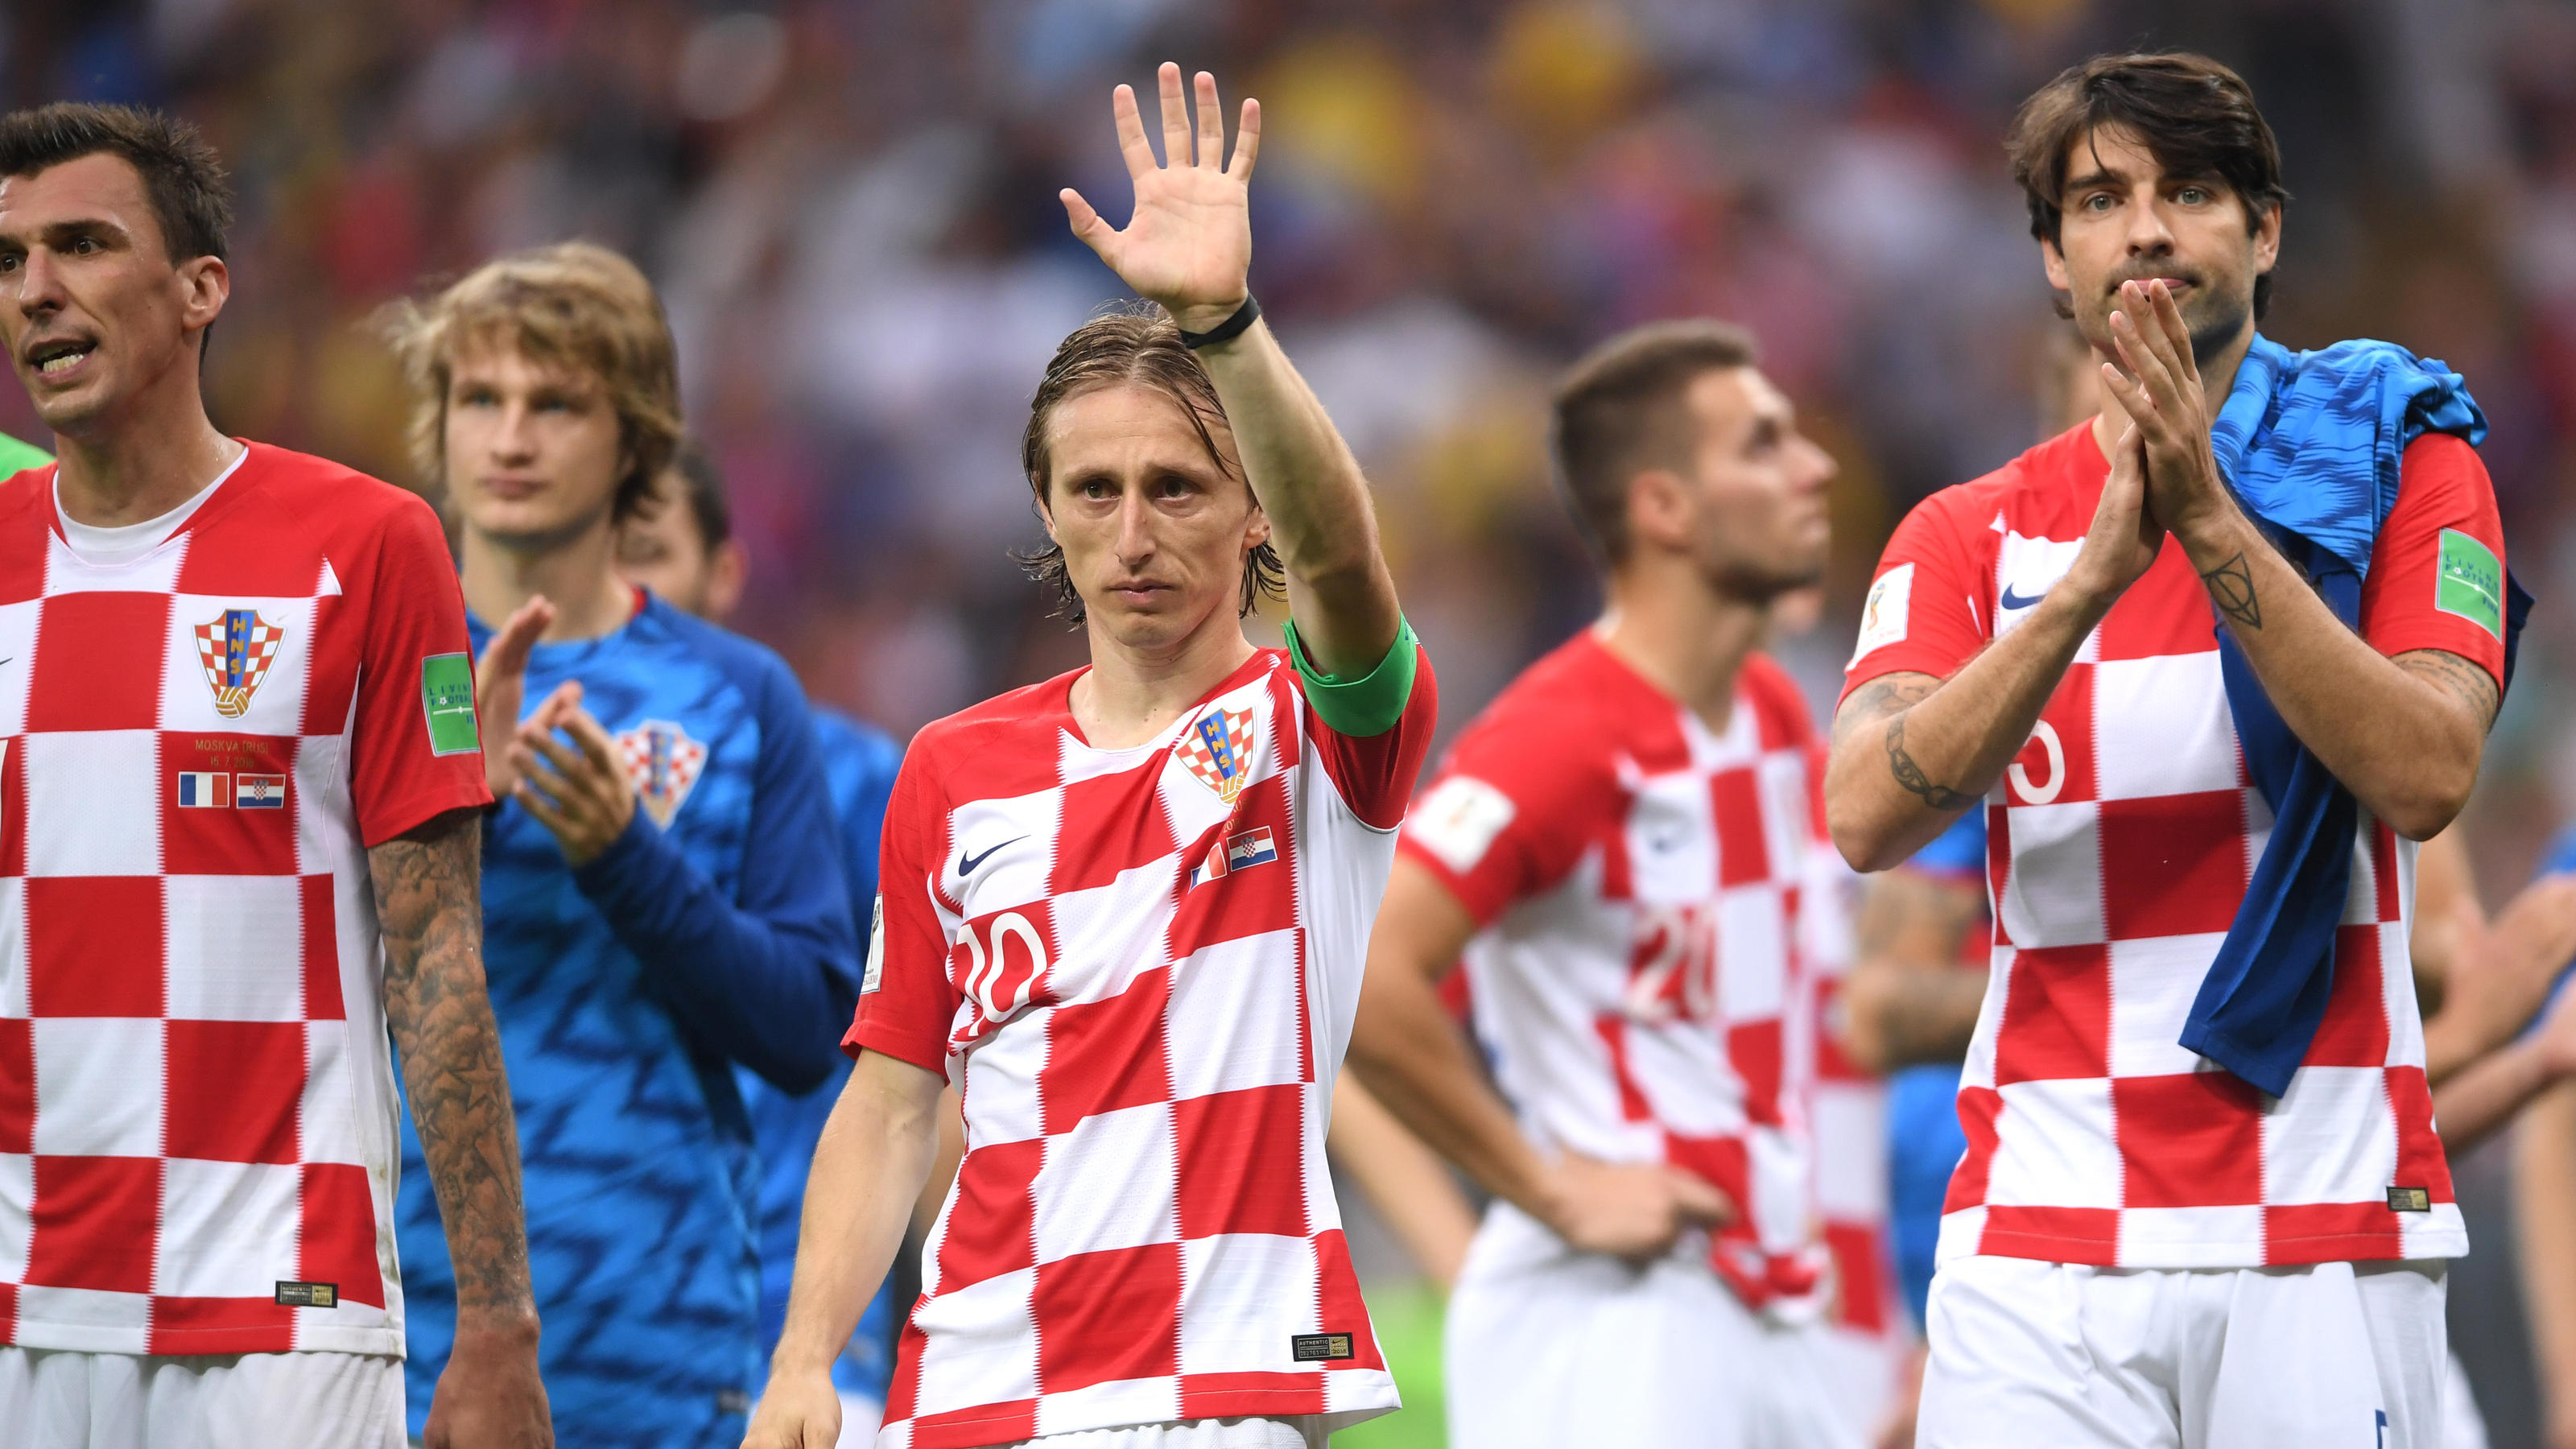 MOSCOW, RUSSIA - JULY 15:  Luka Modric of Croatia applauds fans after the 2018 FIFA World Cup Final between France and Croatia at Luzhniki Stadium on July 15, 2018 in Moscow, Russia.  (Photo by Laurence Griffiths/Getty Images)